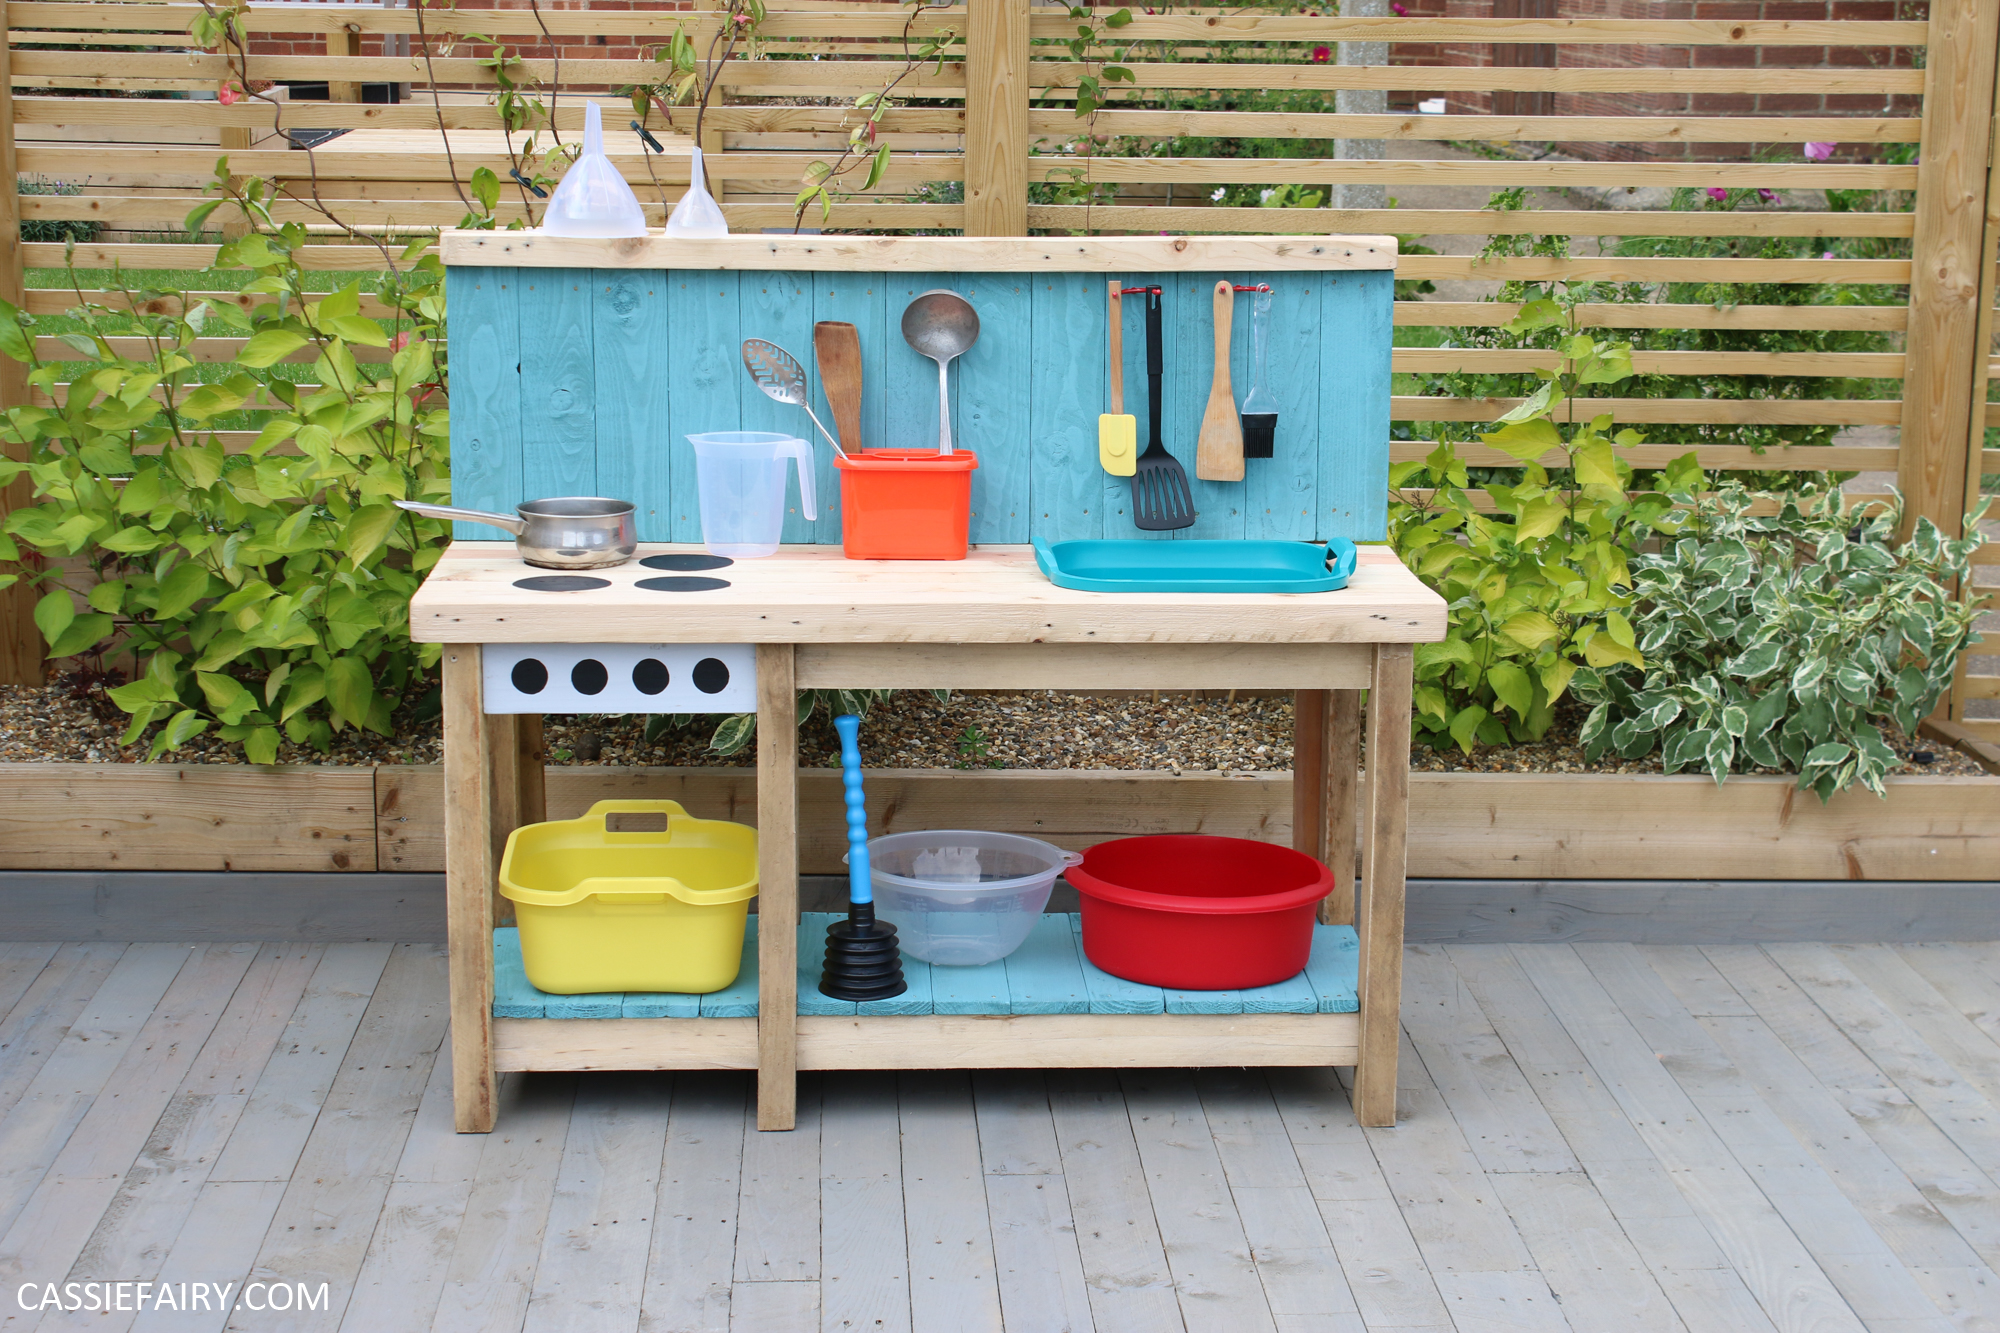 How to DIY a sensory play 'outdoor kitchen' from pallet wood